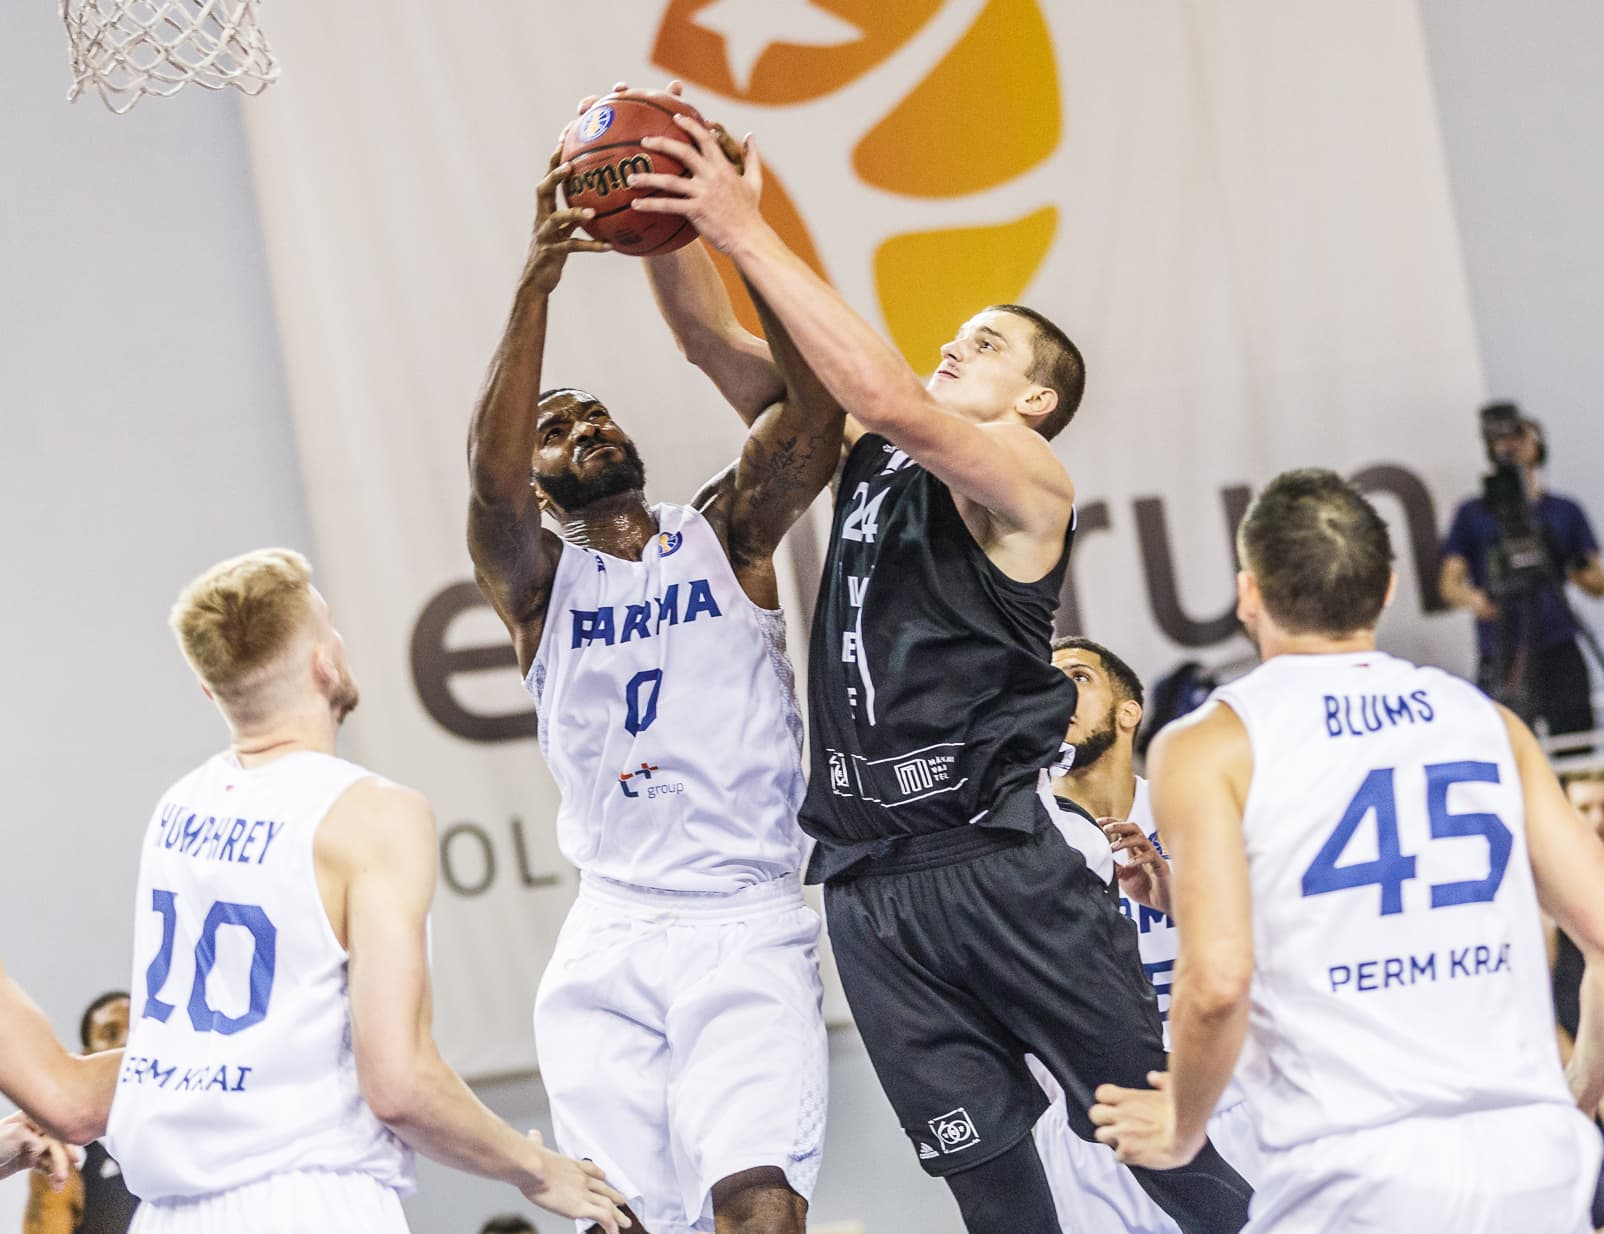 PARMA Opens With Win In Riga